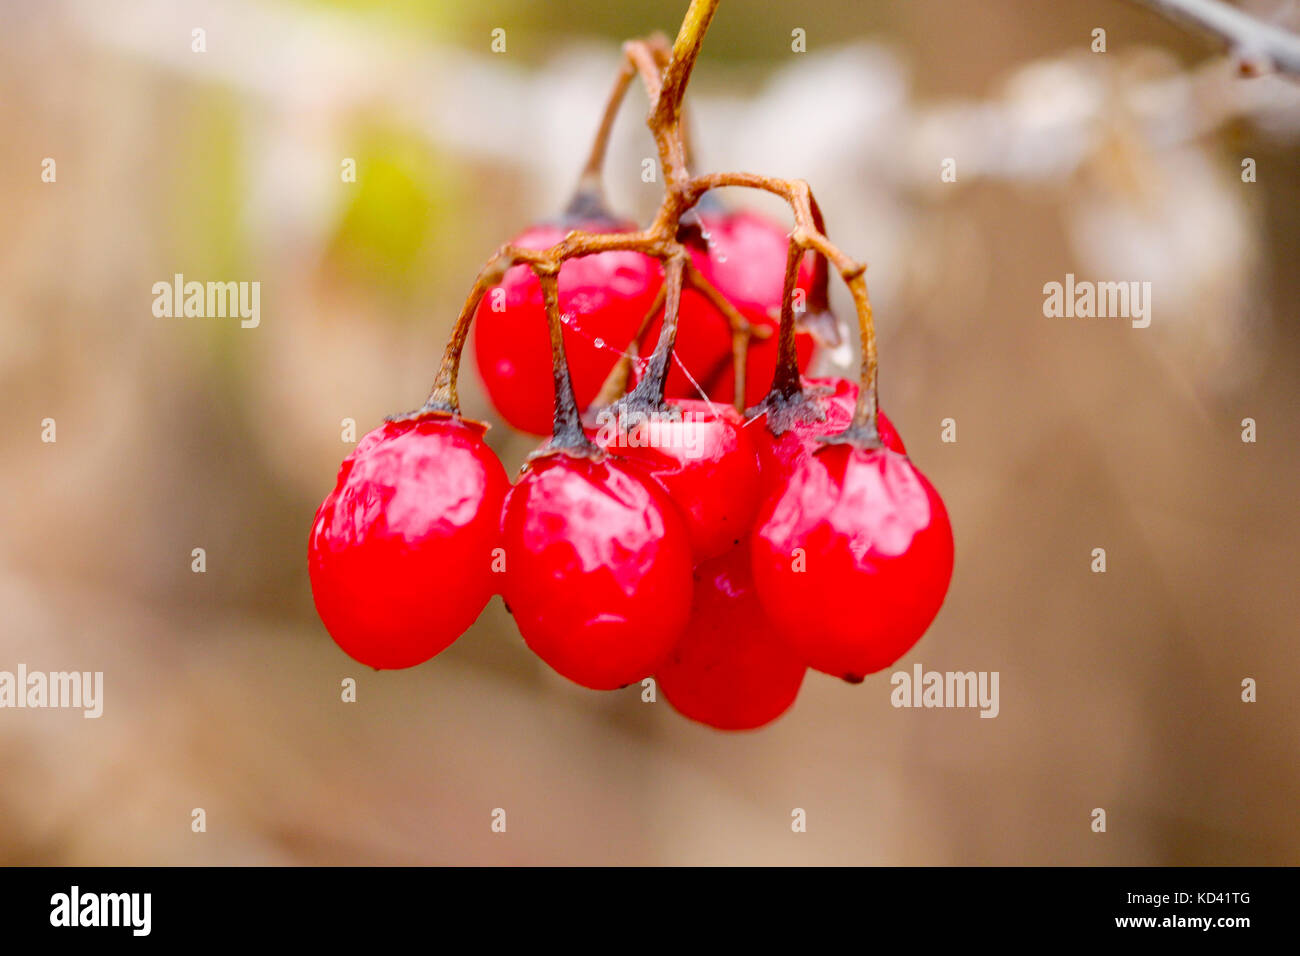 picture of a red berries close up, morning shot Stock Photo